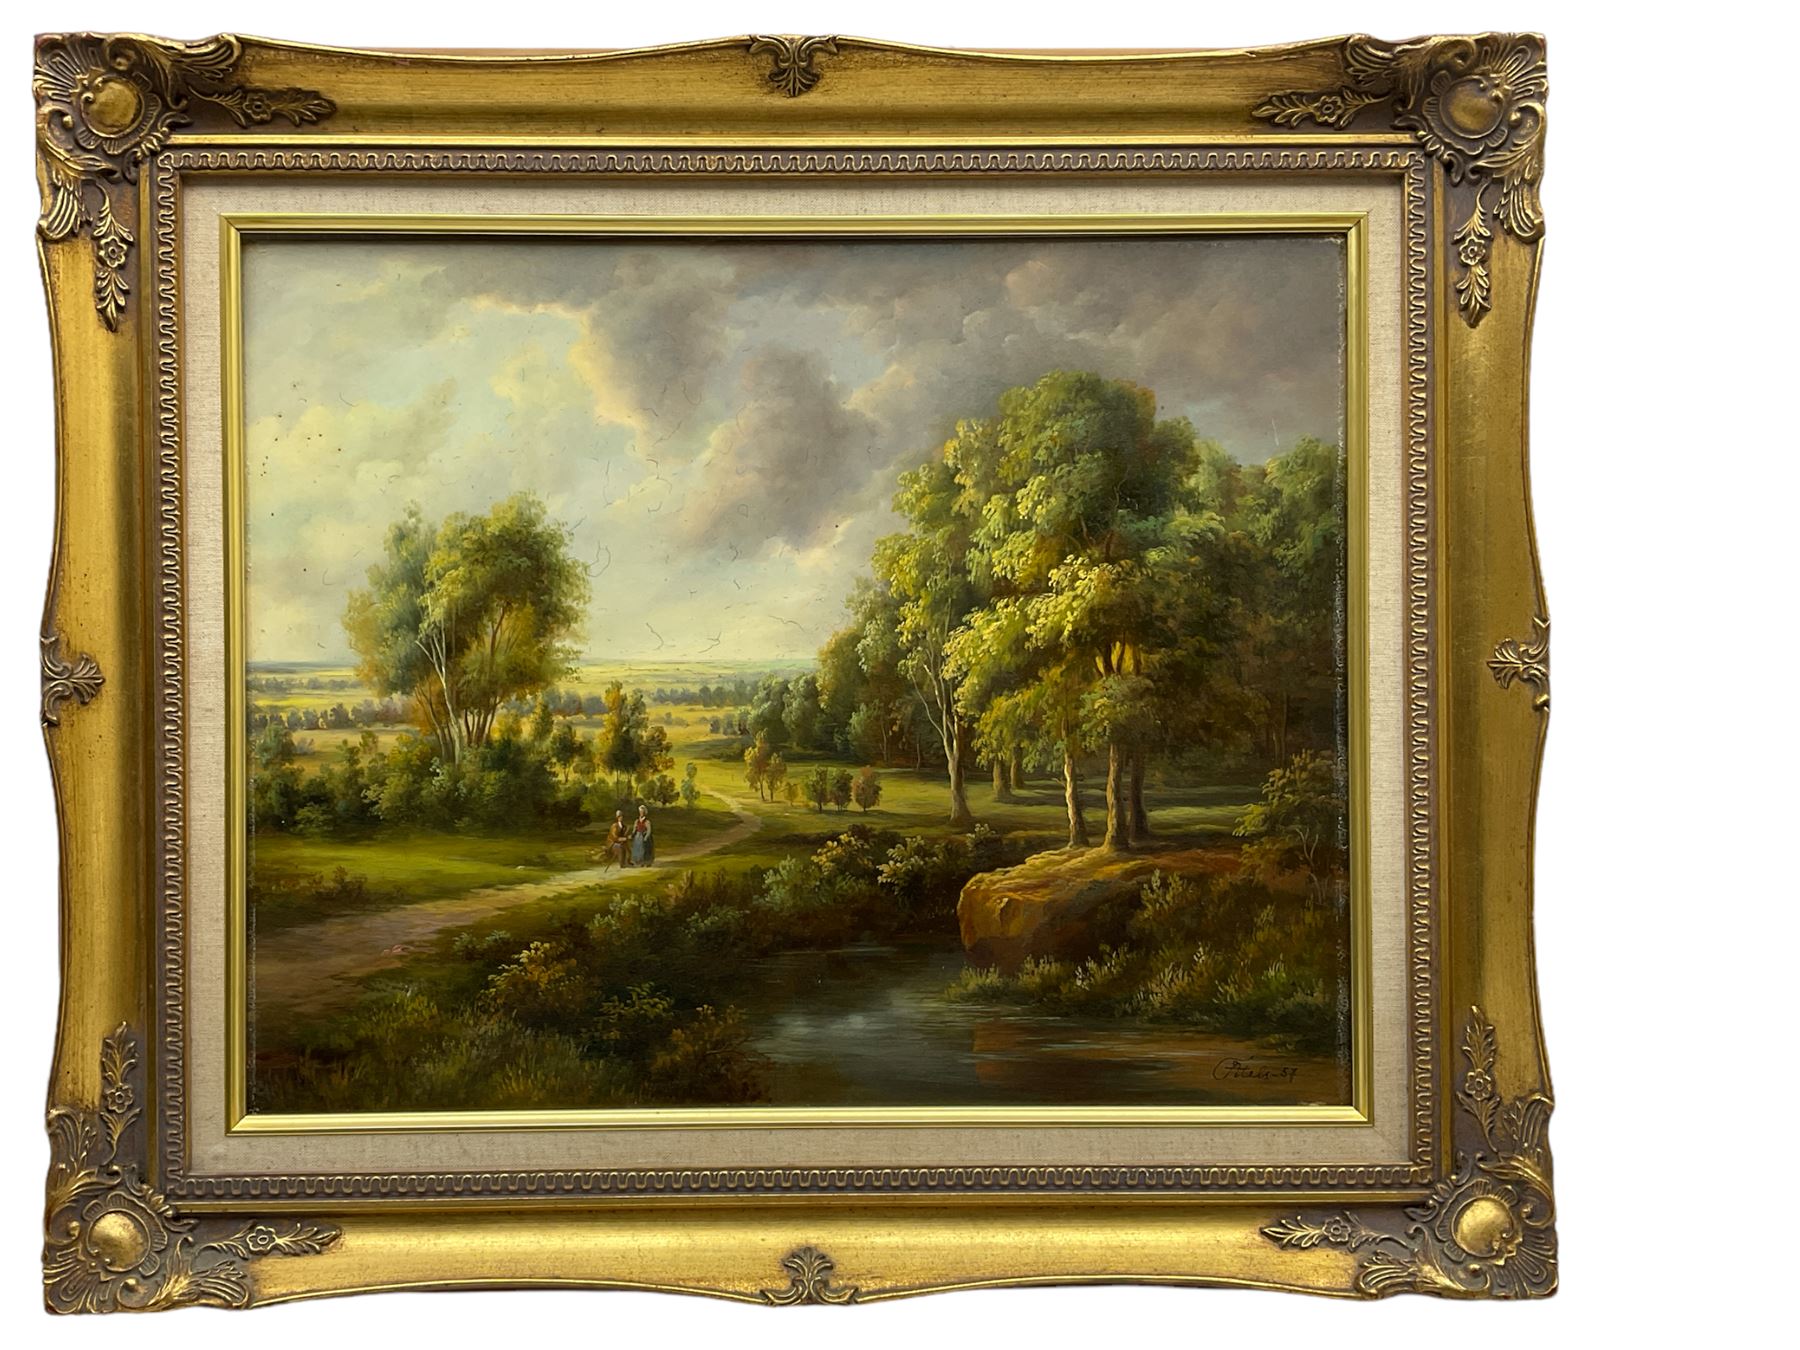 Atels (Continental 20th century): Rural River Landscape with Figures - Image 2 of 4